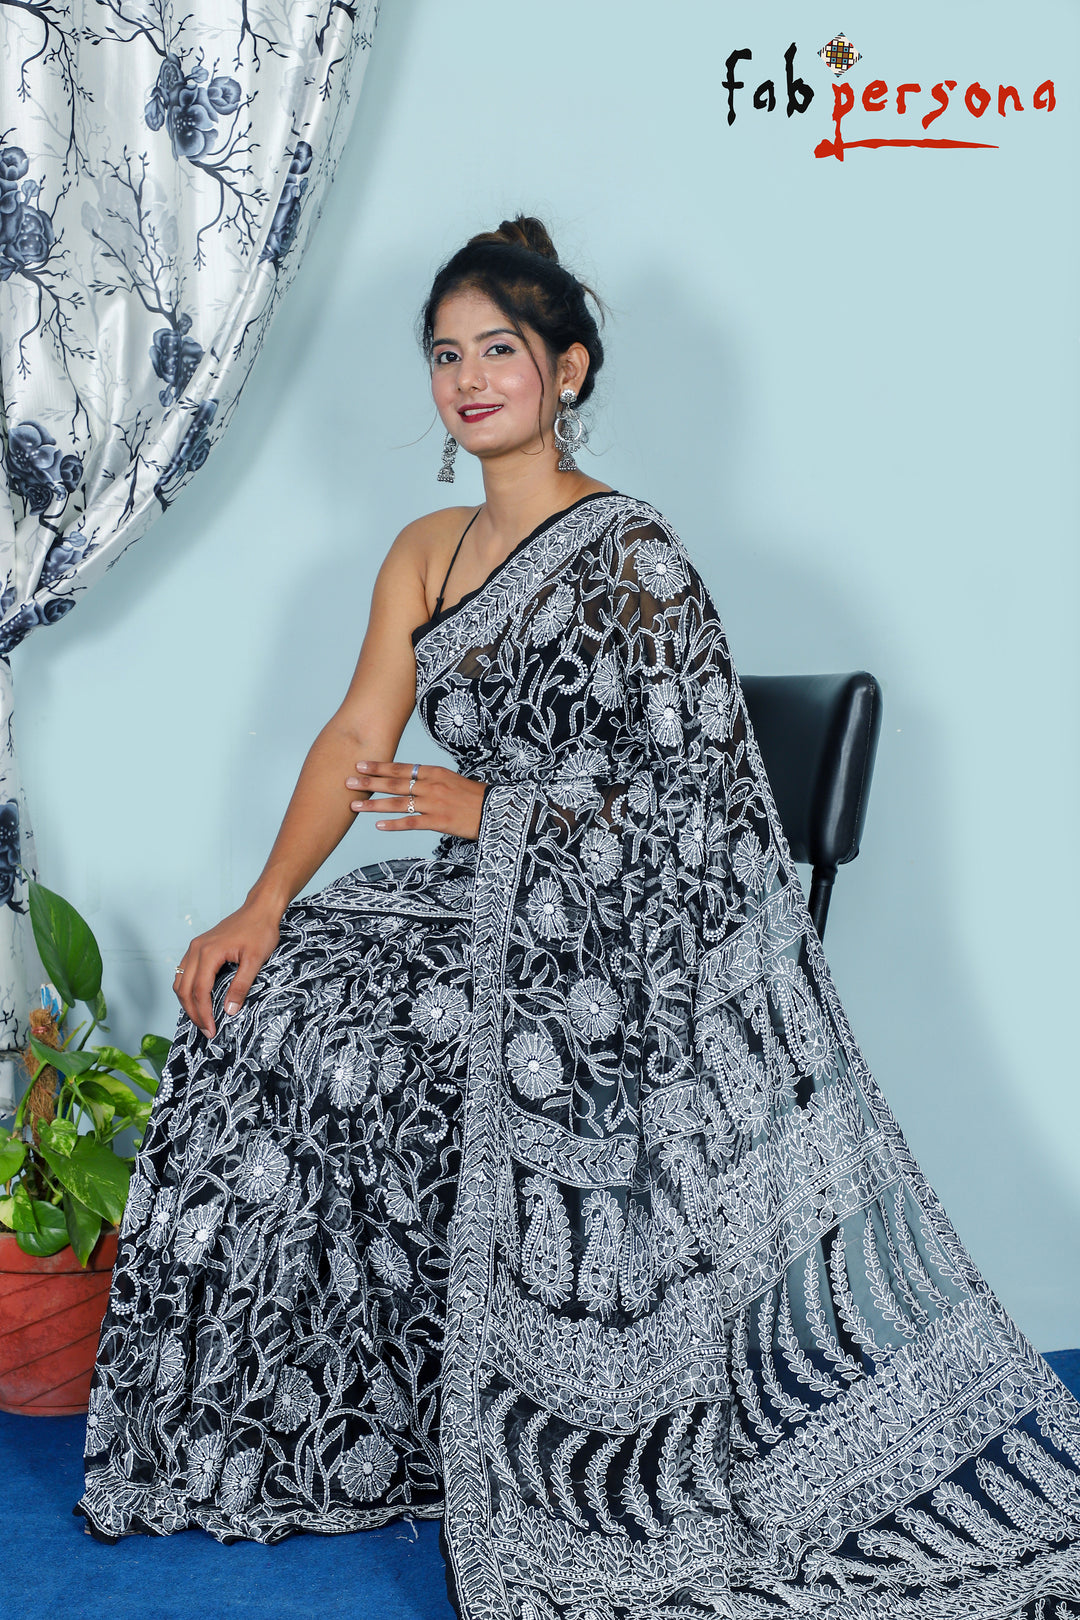 Chiffon Georgette All Over Jaal Chikankari Saree With Heavy Hand Work Embroidery